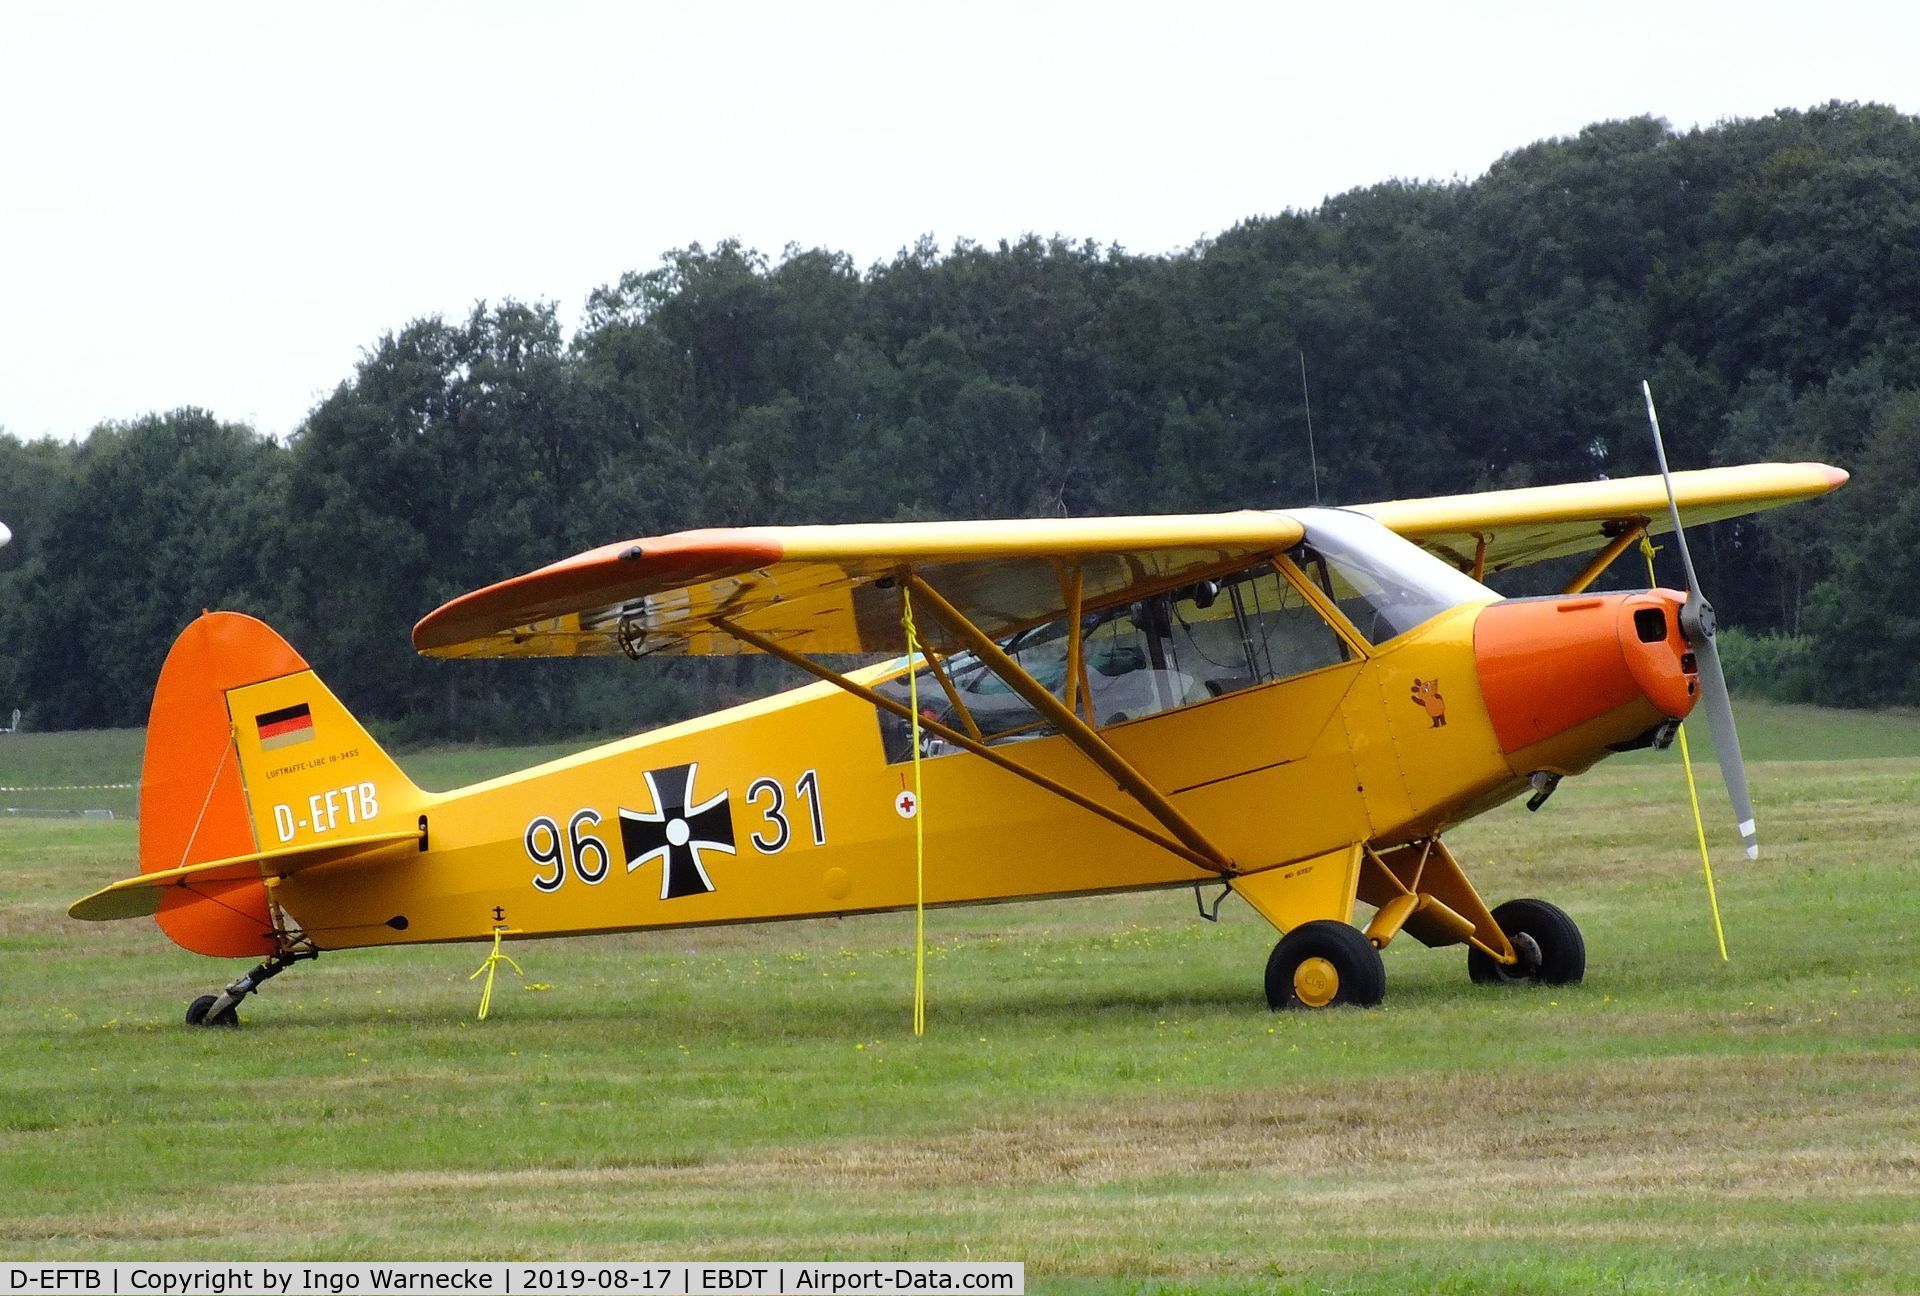 D-EFTB, 1954 Piper L-18C Super Cub (PA-18-95) C/N 18-3455, Piper L-18C Super Cub (PA-18-95) at the 2019 Fly-in at Diest/Schaffen airfield